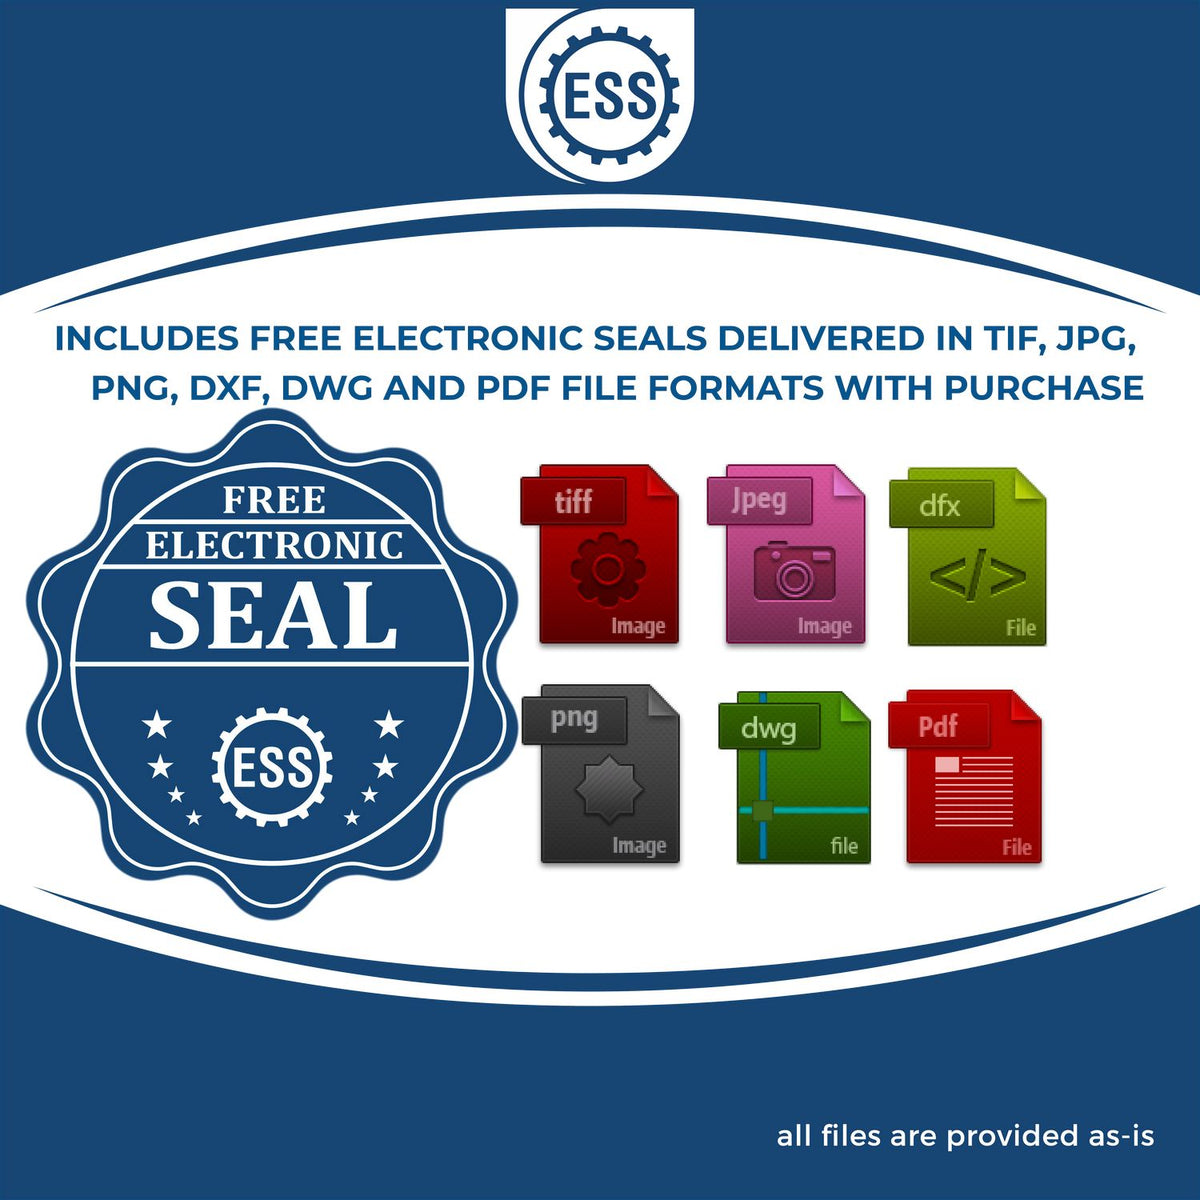 An infographic for the free electronic seal for the Massachusetts Professional Geologist Seal Stamp illustrating the different file type icons such as DXF, DWG, TIF, JPG and PNG.